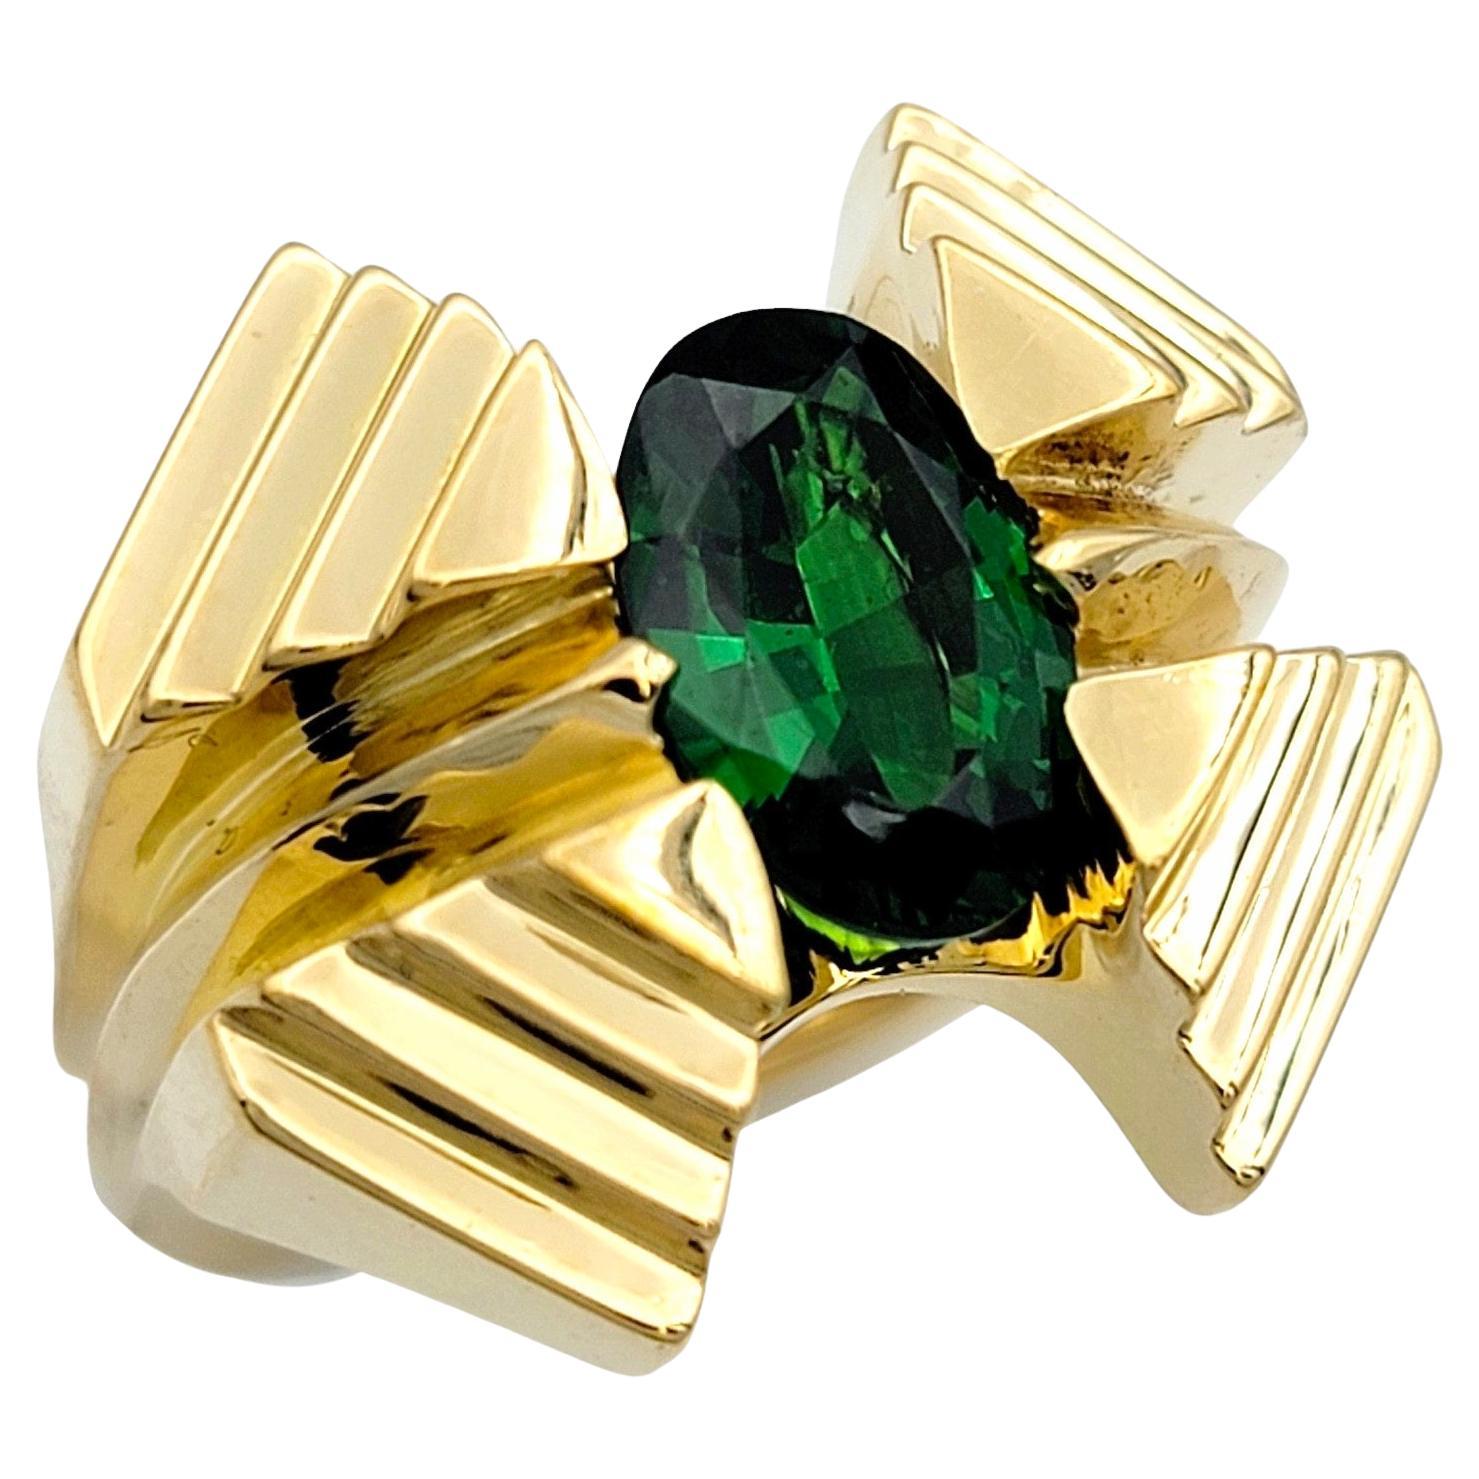 Ring Size: 7.5

This gorgeous oval tsavorite garnet ring, set in radiant 18 karat yellow gold, is a striking testament to elegance and sophistication. At its center, the vivid green tsavorite garnet gemstone captivates with its rich color and